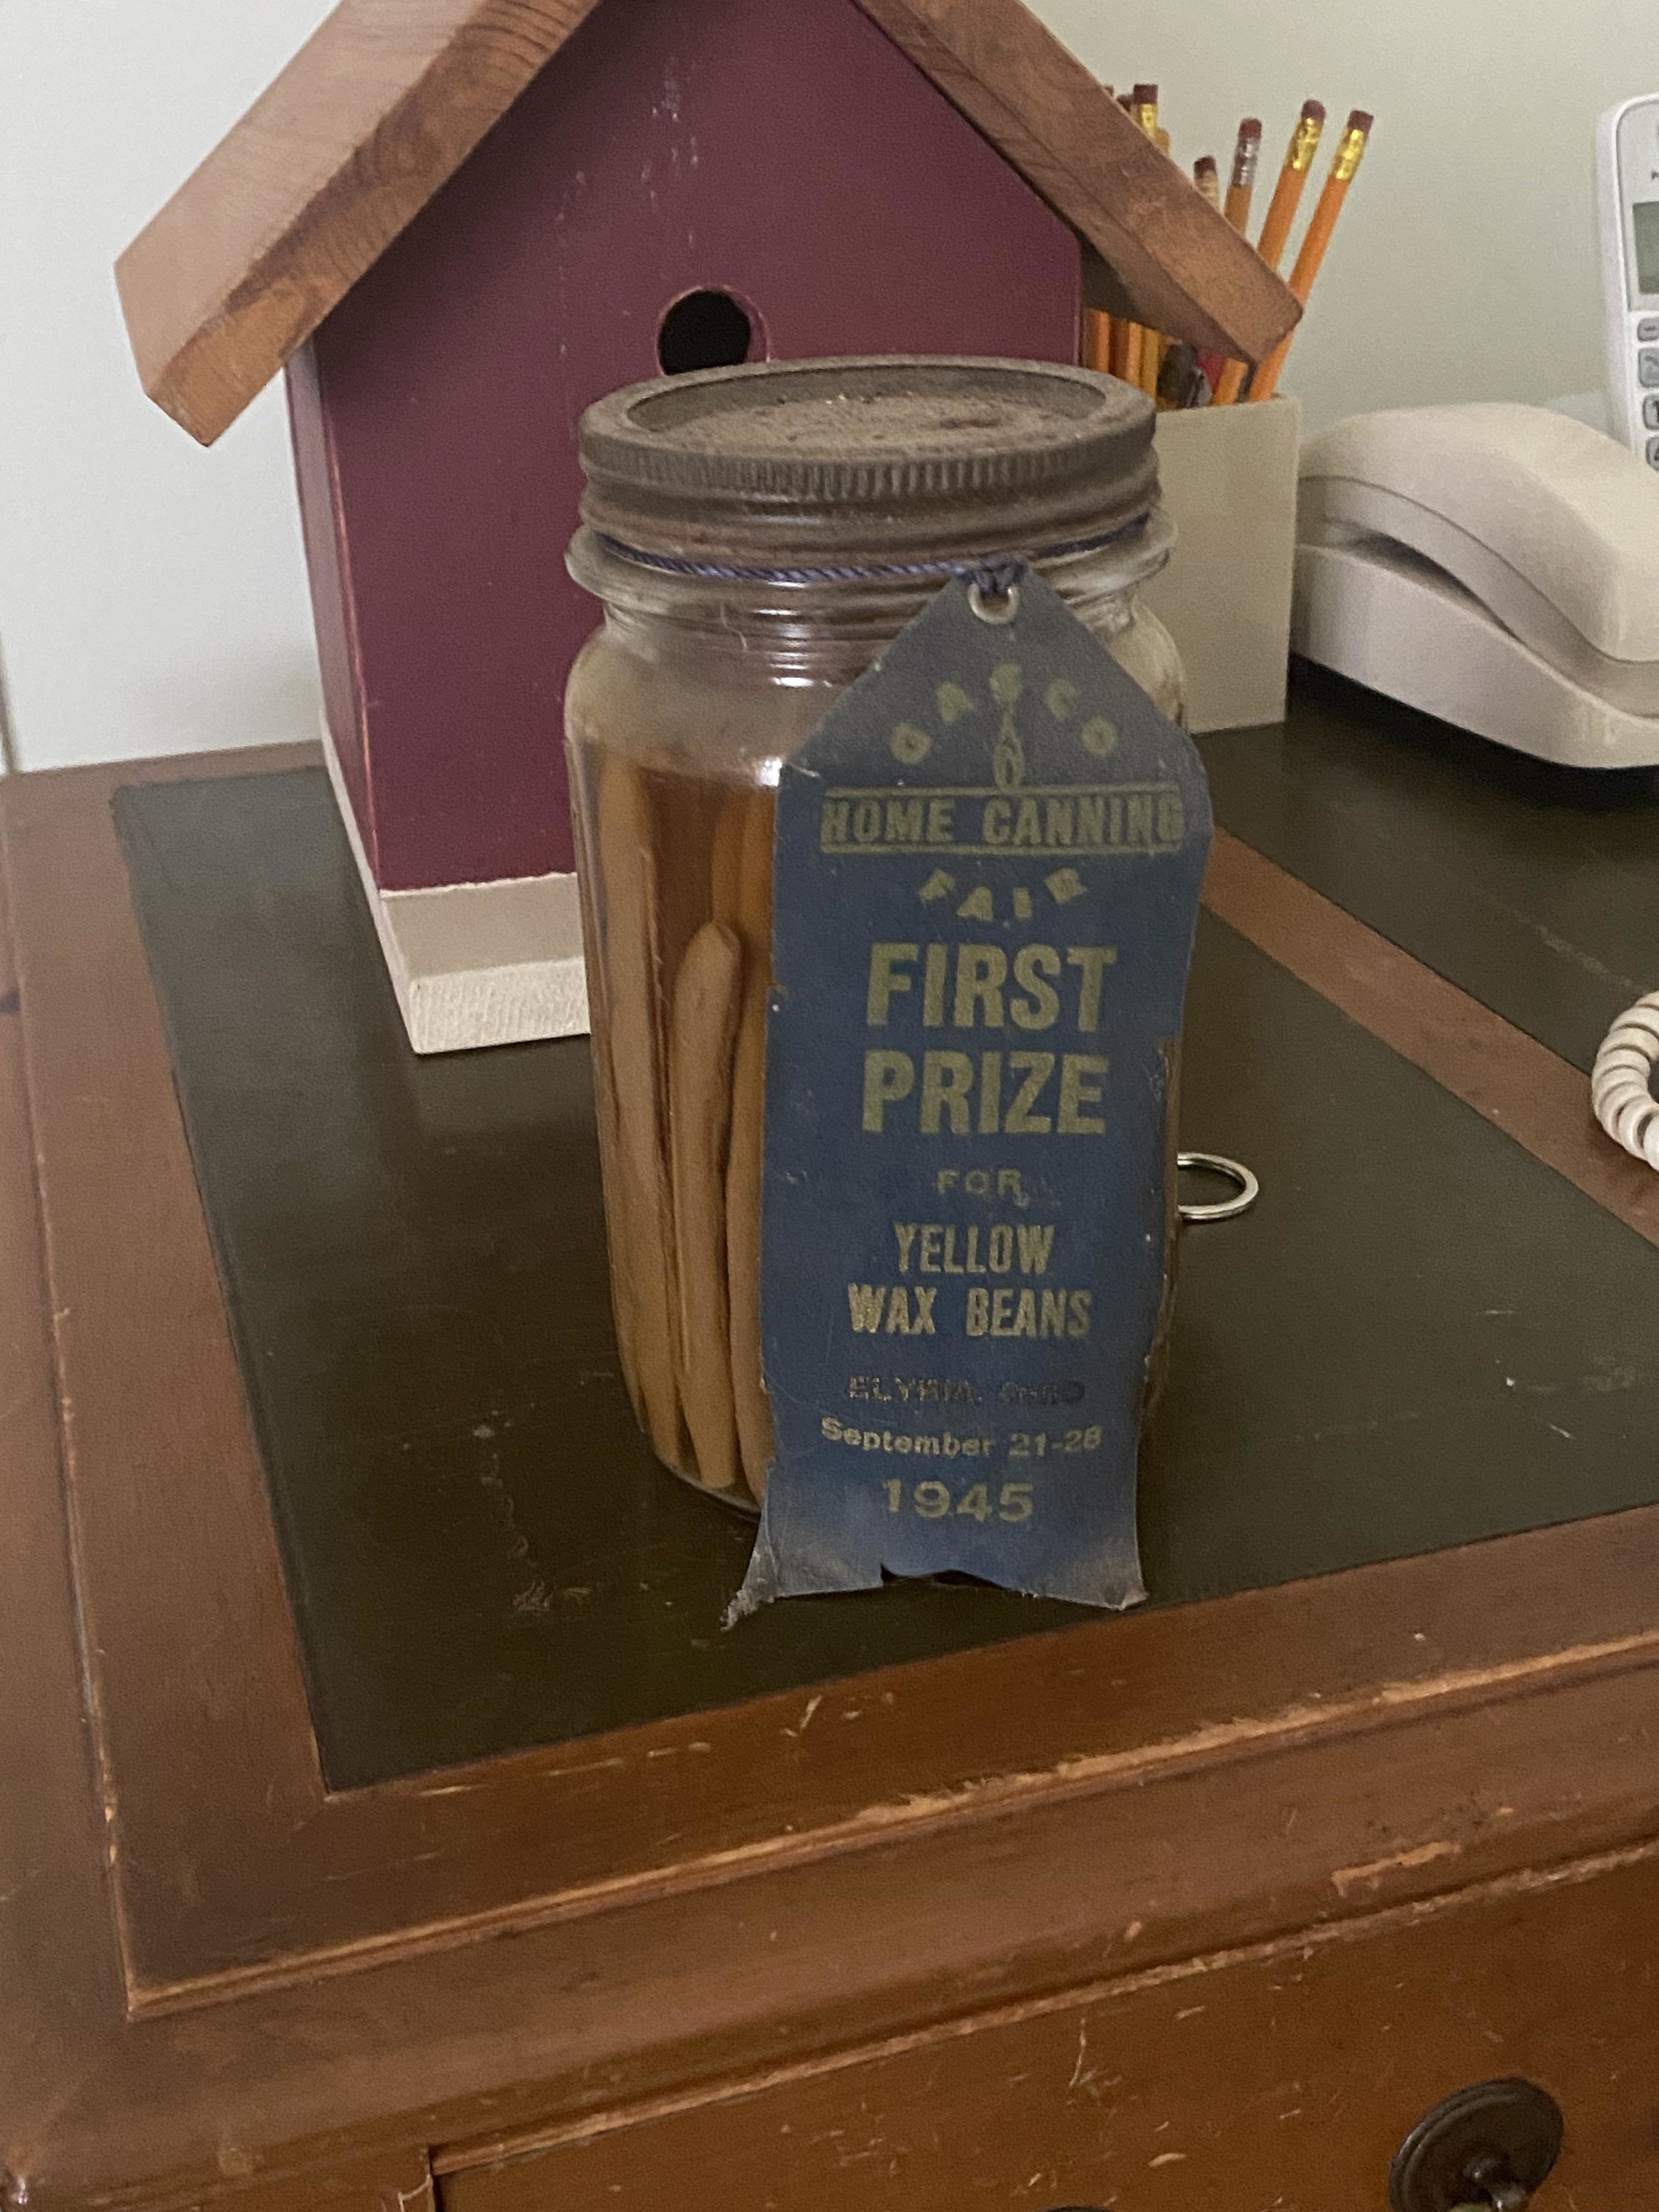 Jar of yellow wax beans with a &#x27;First Prize&#x27; ribbon from a 1945 canning fair on a wooden surface